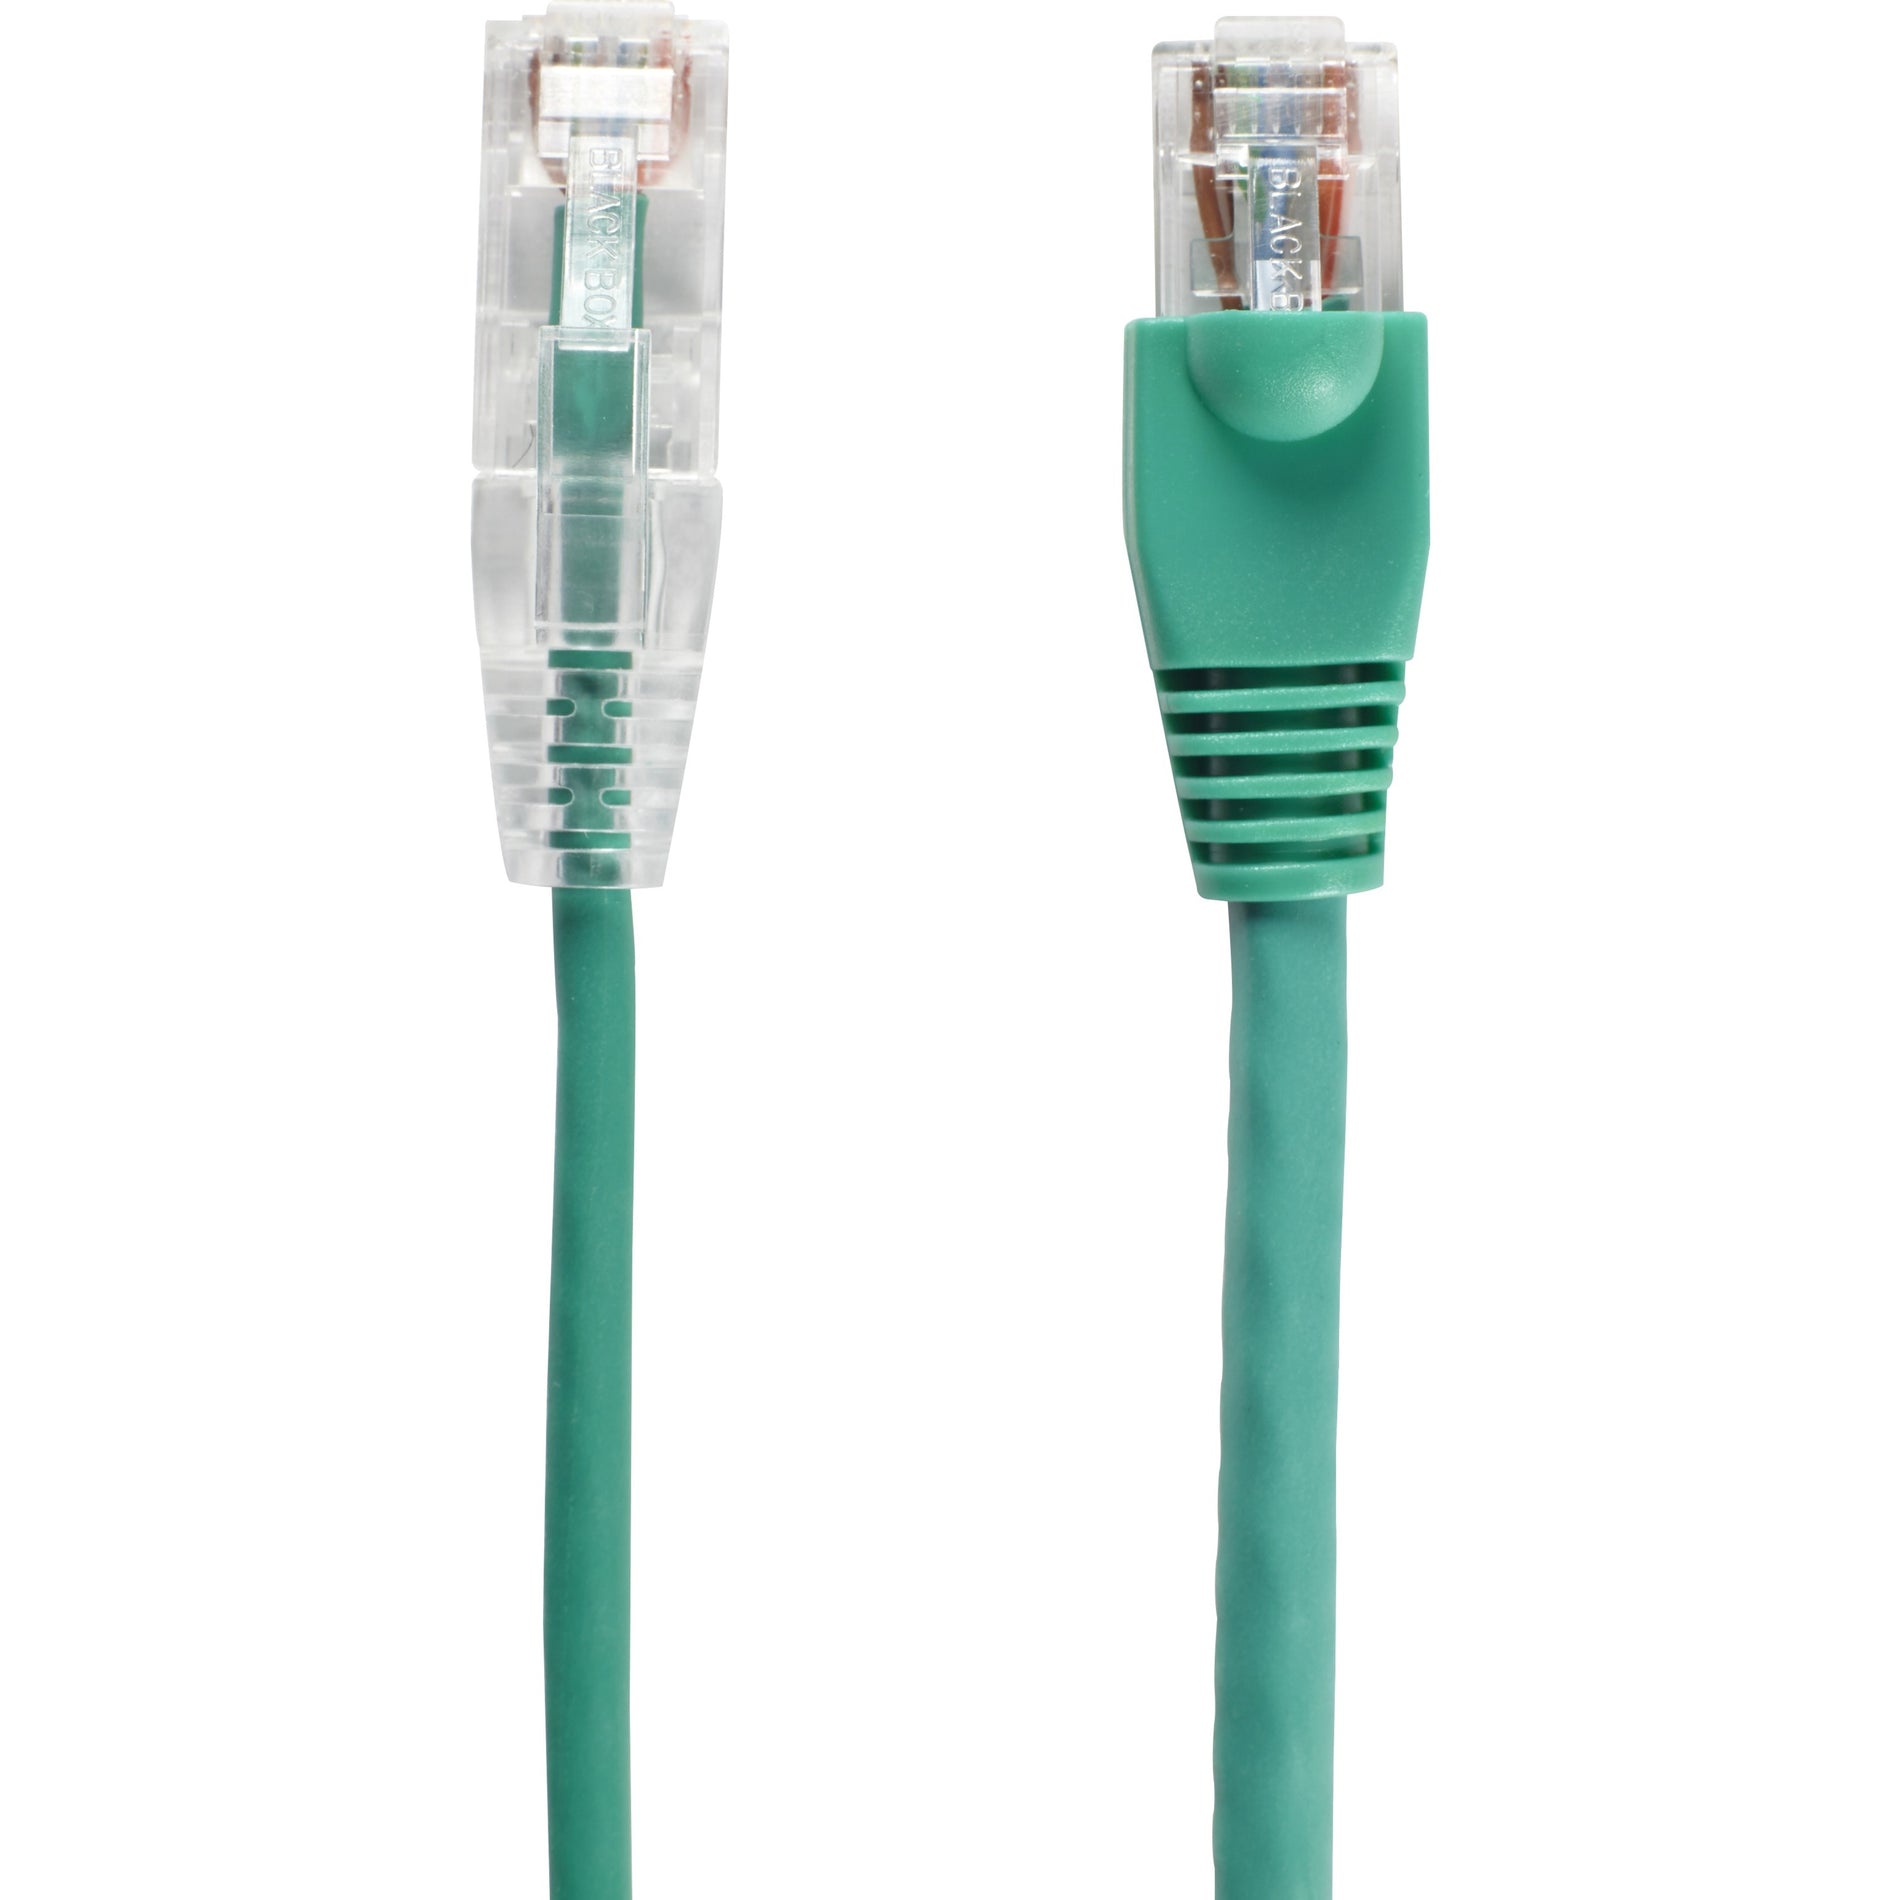 Black Box C6APC28-GN-12 Slim-Net Cat.6a UTP Patch Network Cable, 12 ft, Green